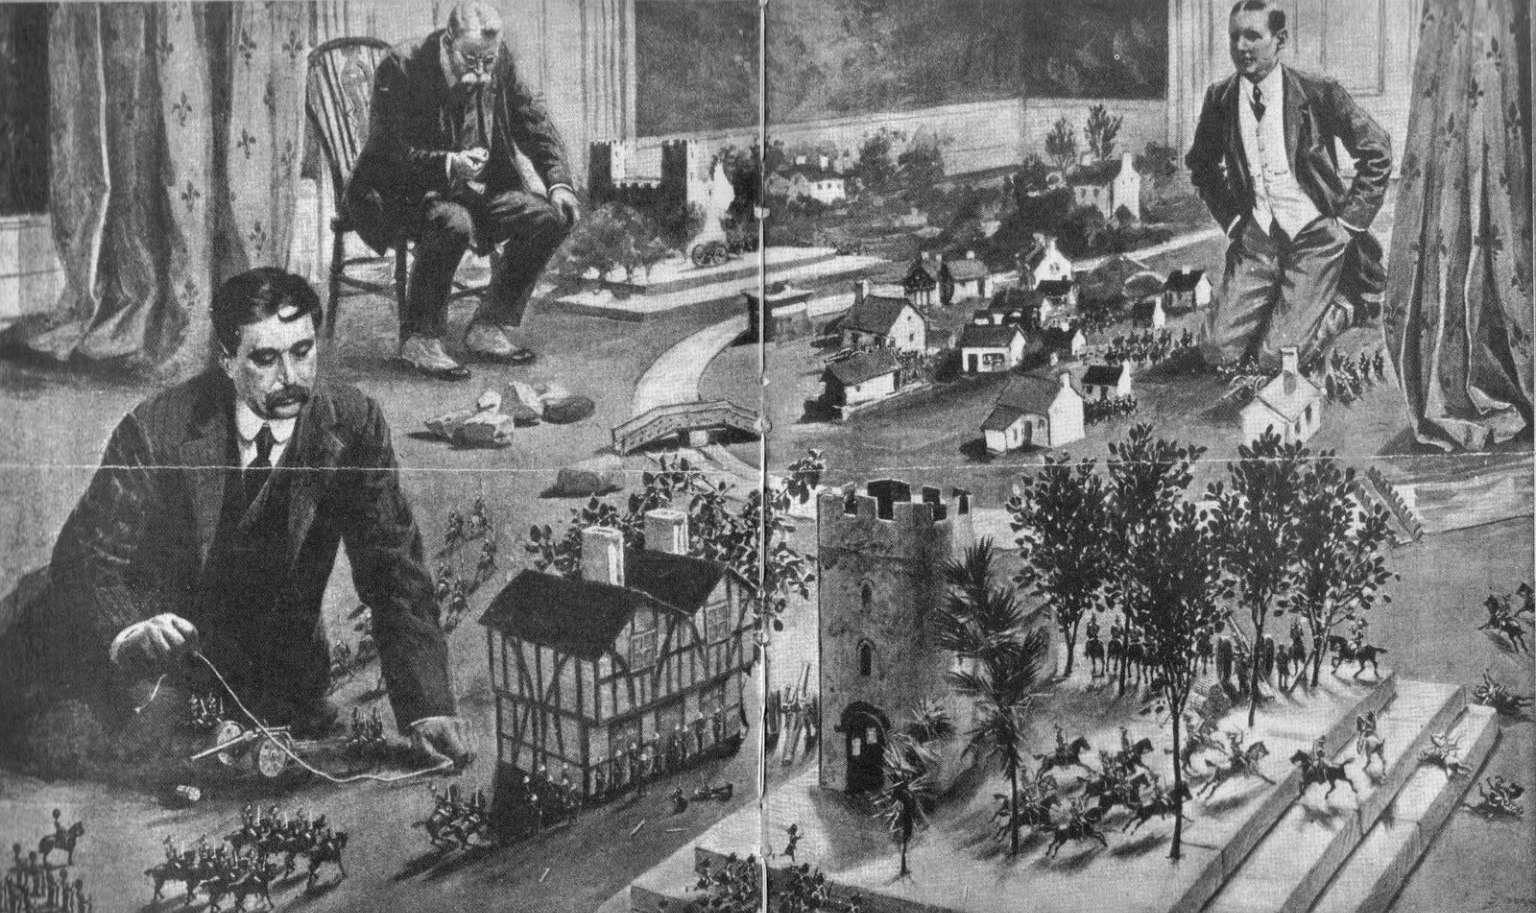 Newspaper illustration of H. G. Wells playing a war game